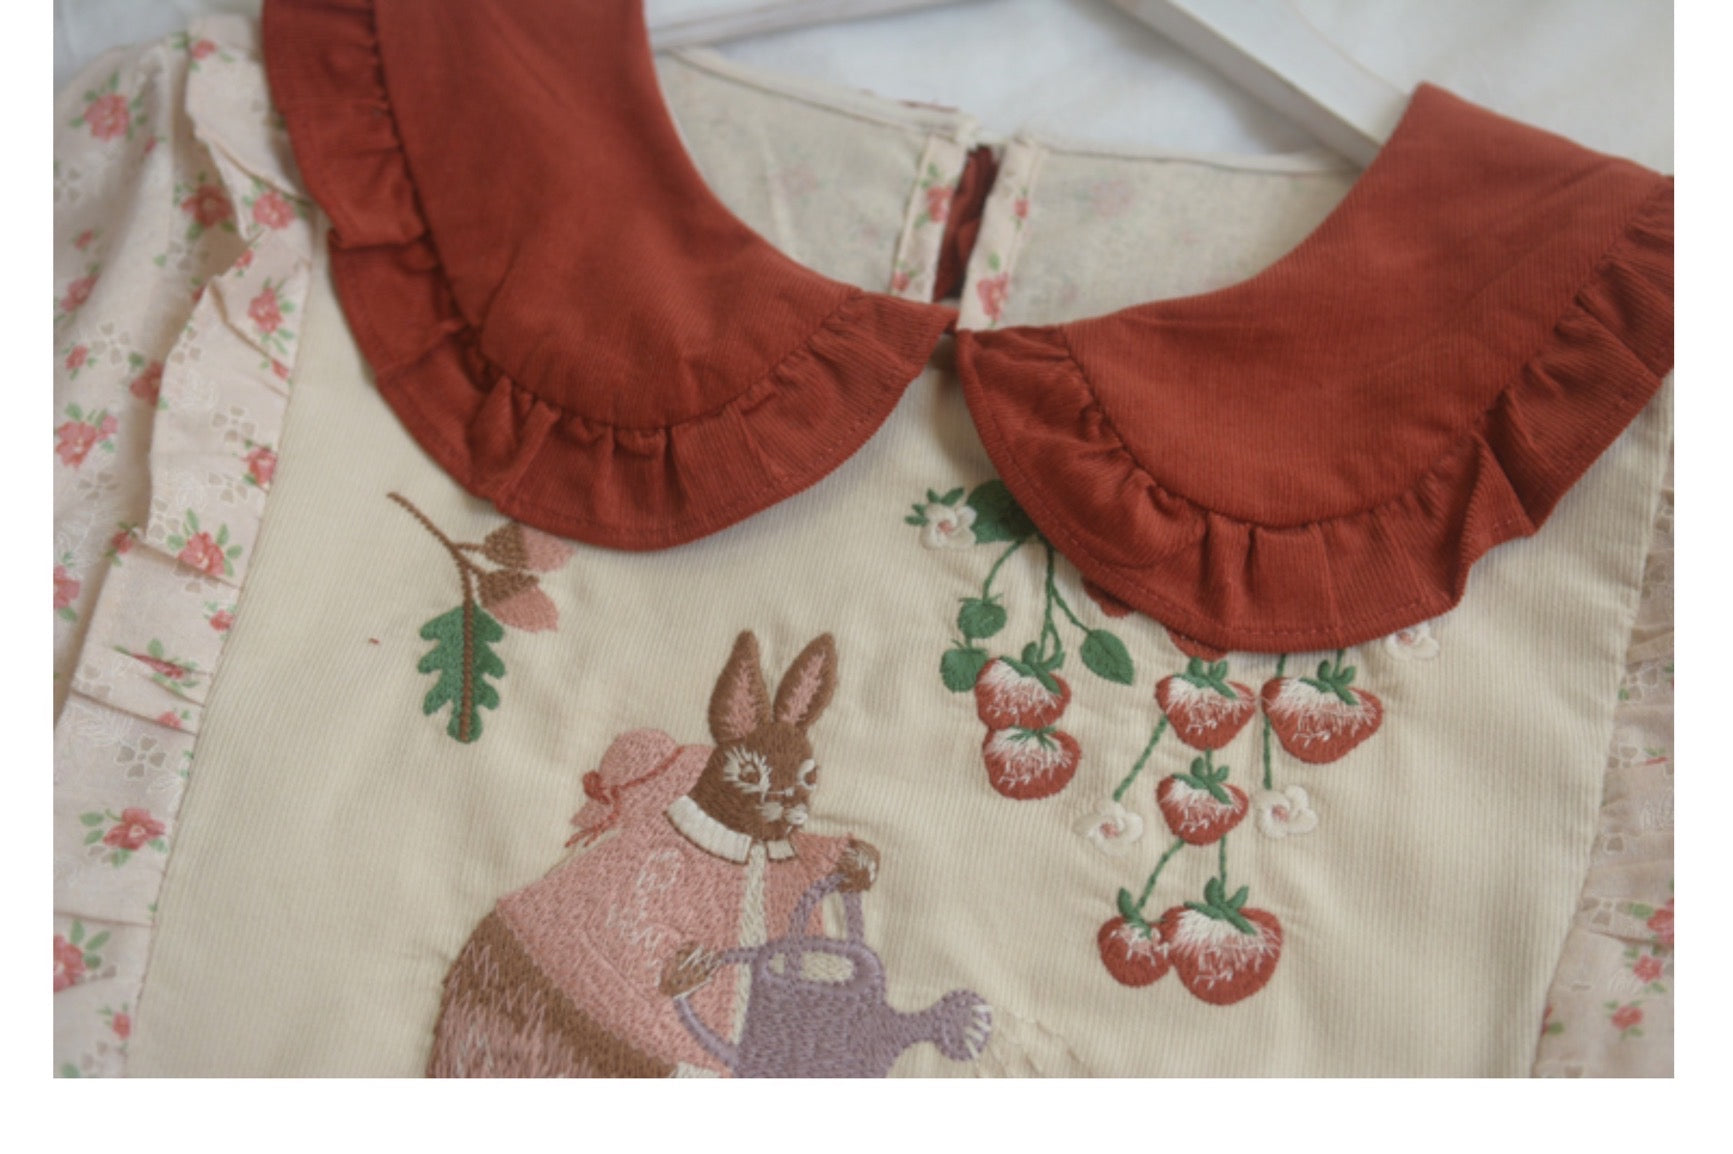 Rabbit's Strawberry Garden Cottagecore Goblincore Dress with Embroidery